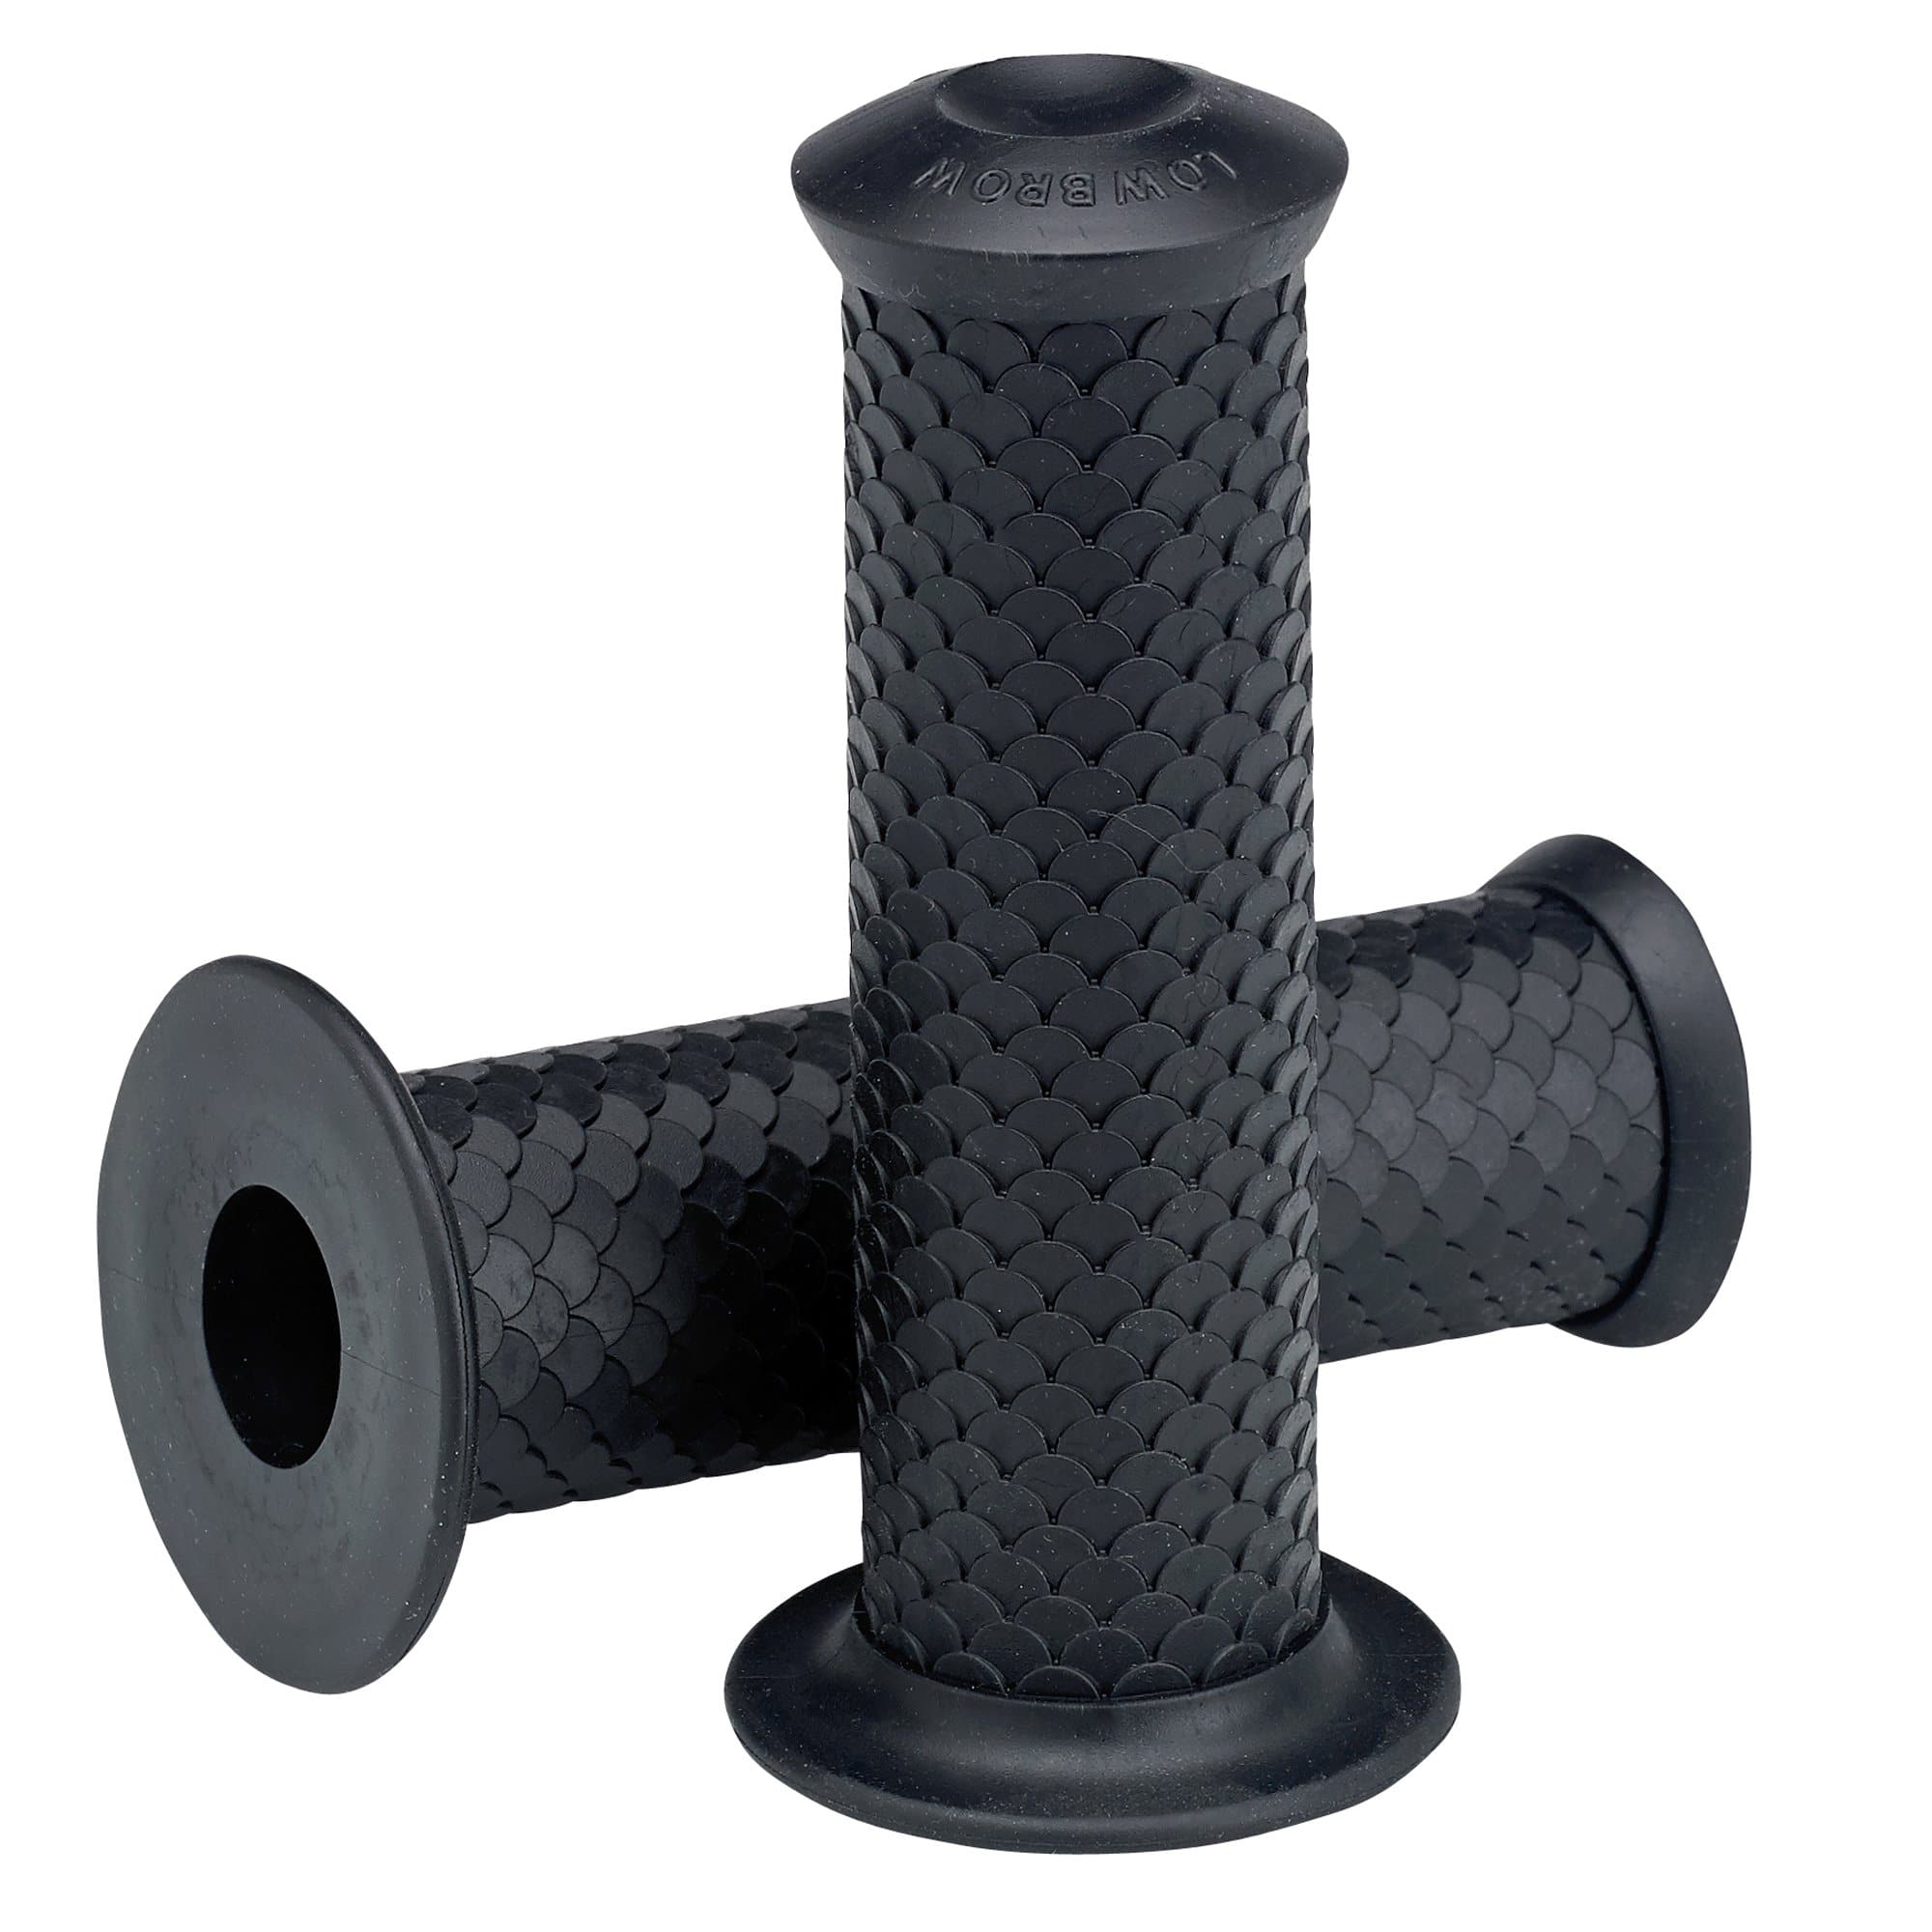 https://www.lowbrowcustoms.com/cdn/shop/products/large_3630_003630-lowbrow-customs-fish-scale-motorcycle-handlebar-grips-black-1_2_2000x.jpg?v=1588895635